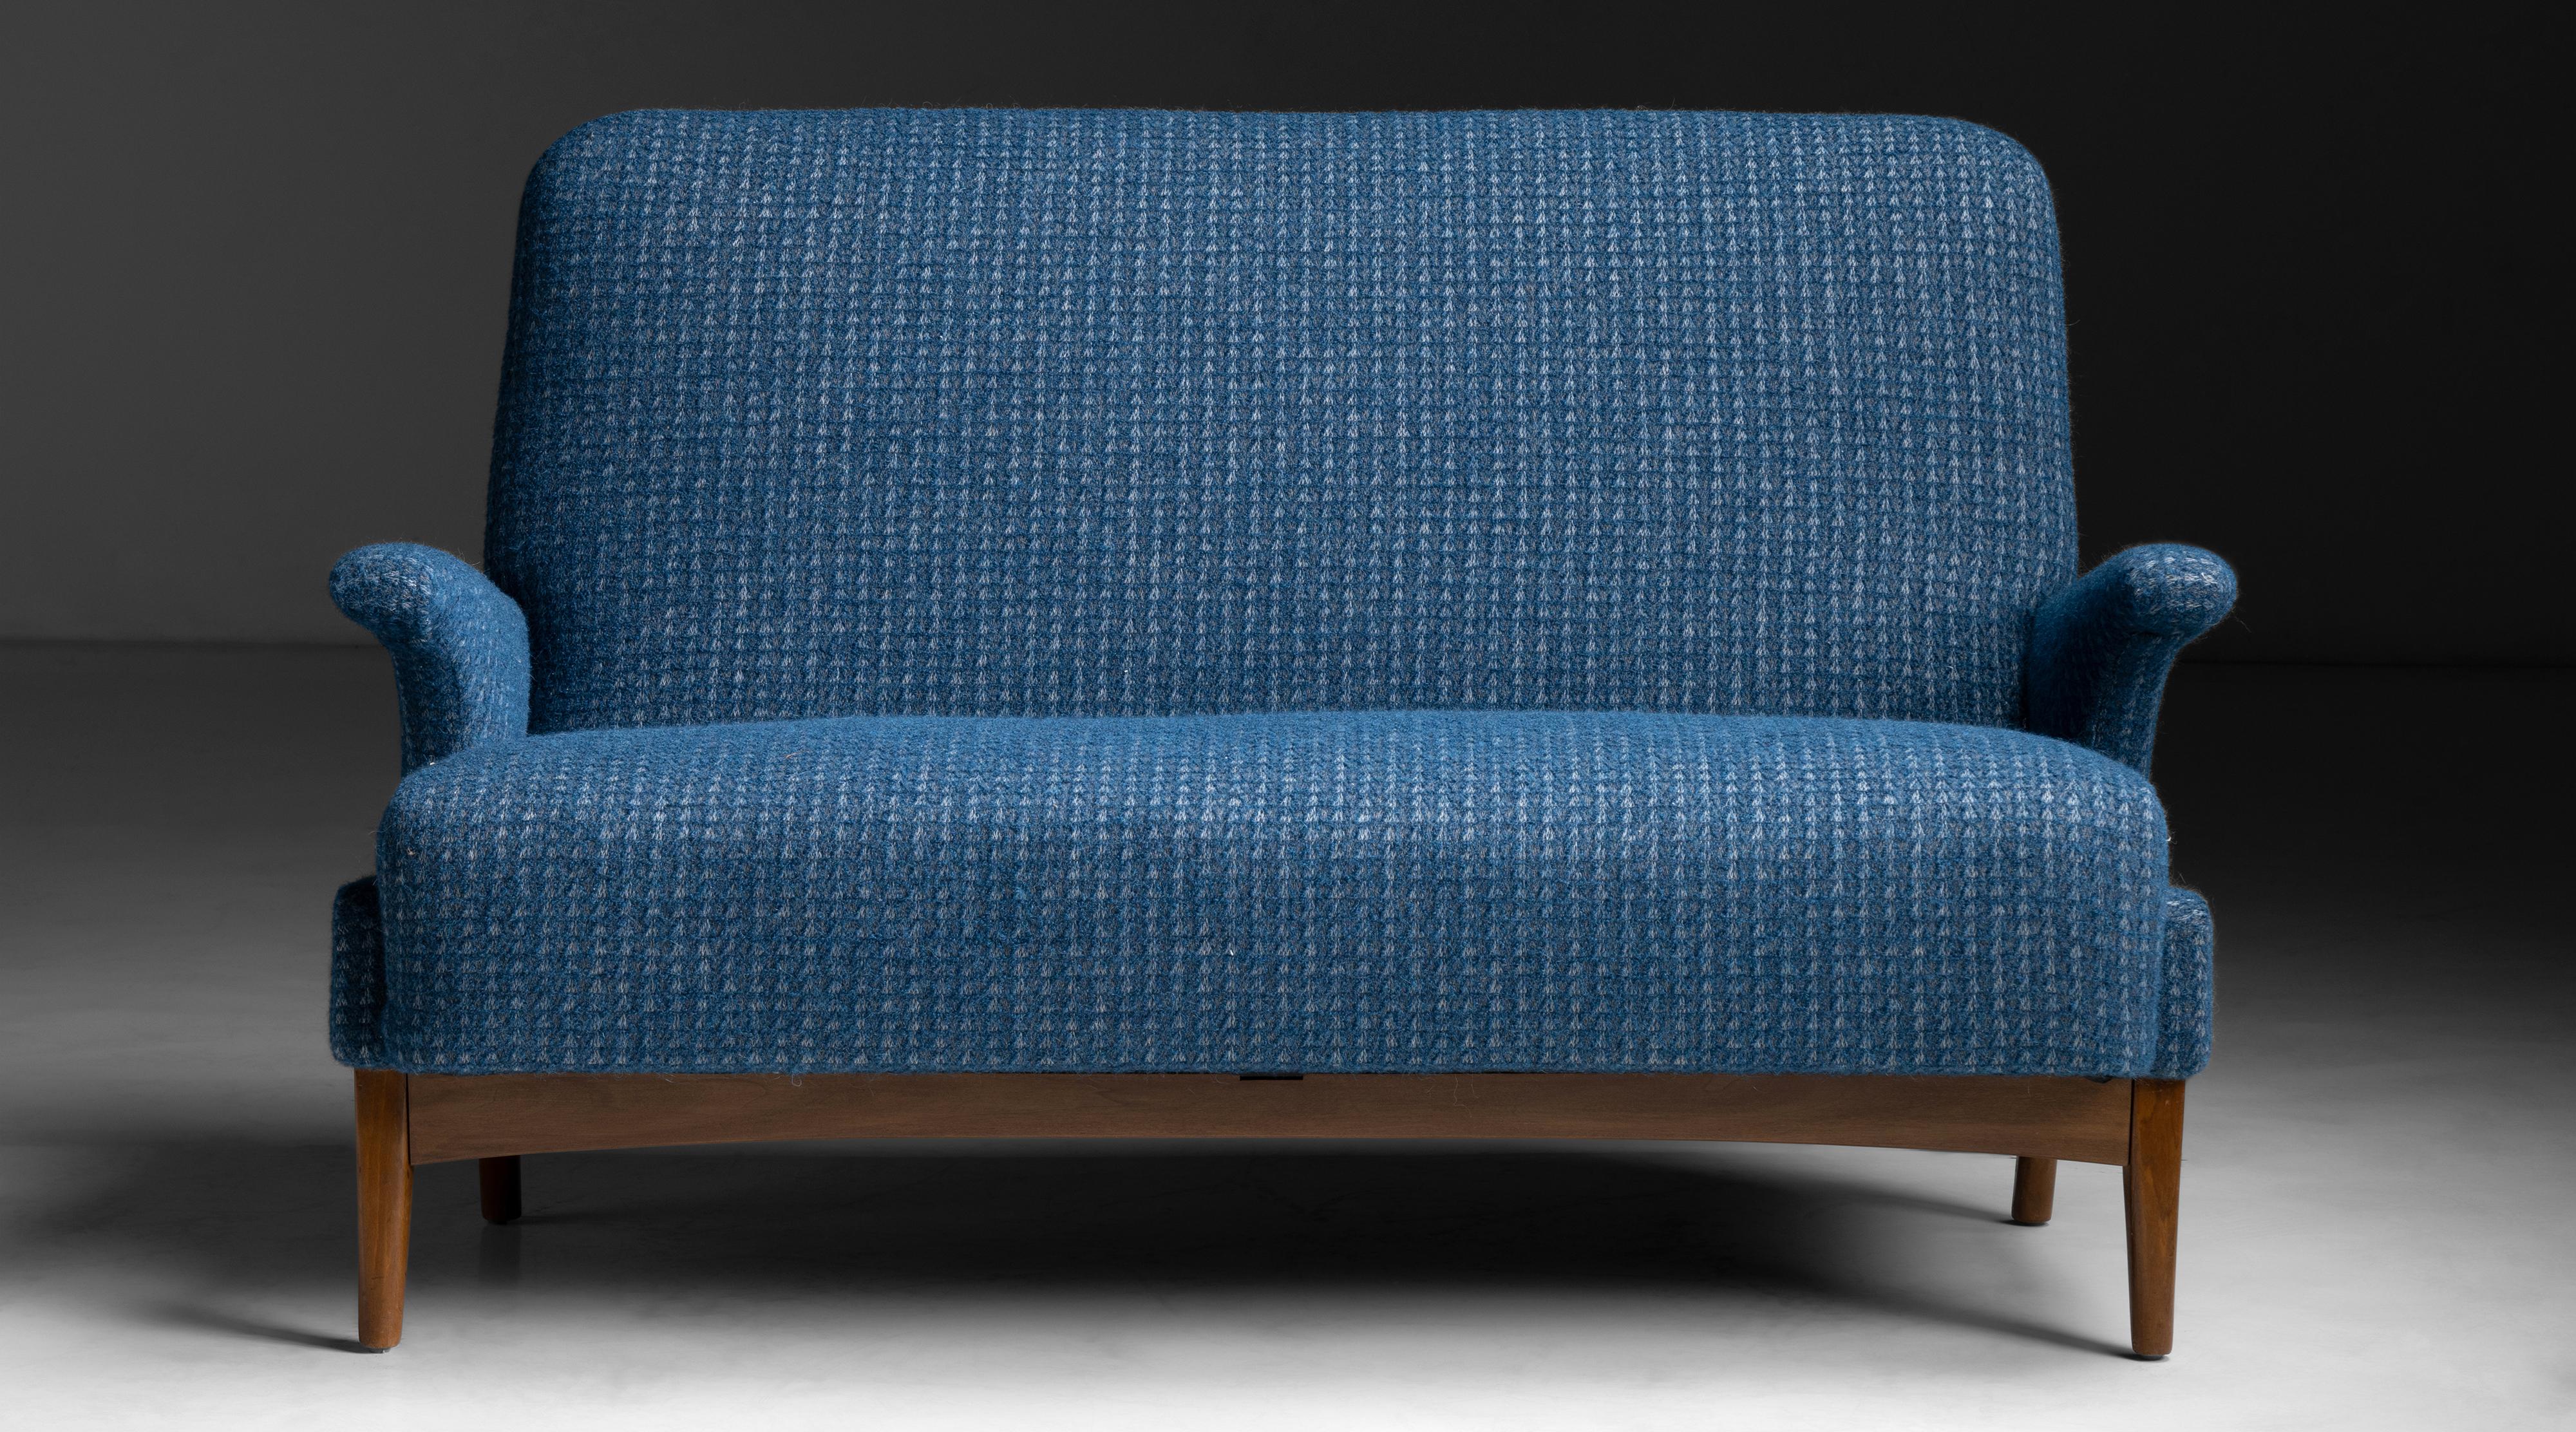 Sofa by Fritz Hansen, Denmark, circa 1950.

Model 5020, 

Newly upholstered in Wool Blend by Holland & Sherry on beech frame.